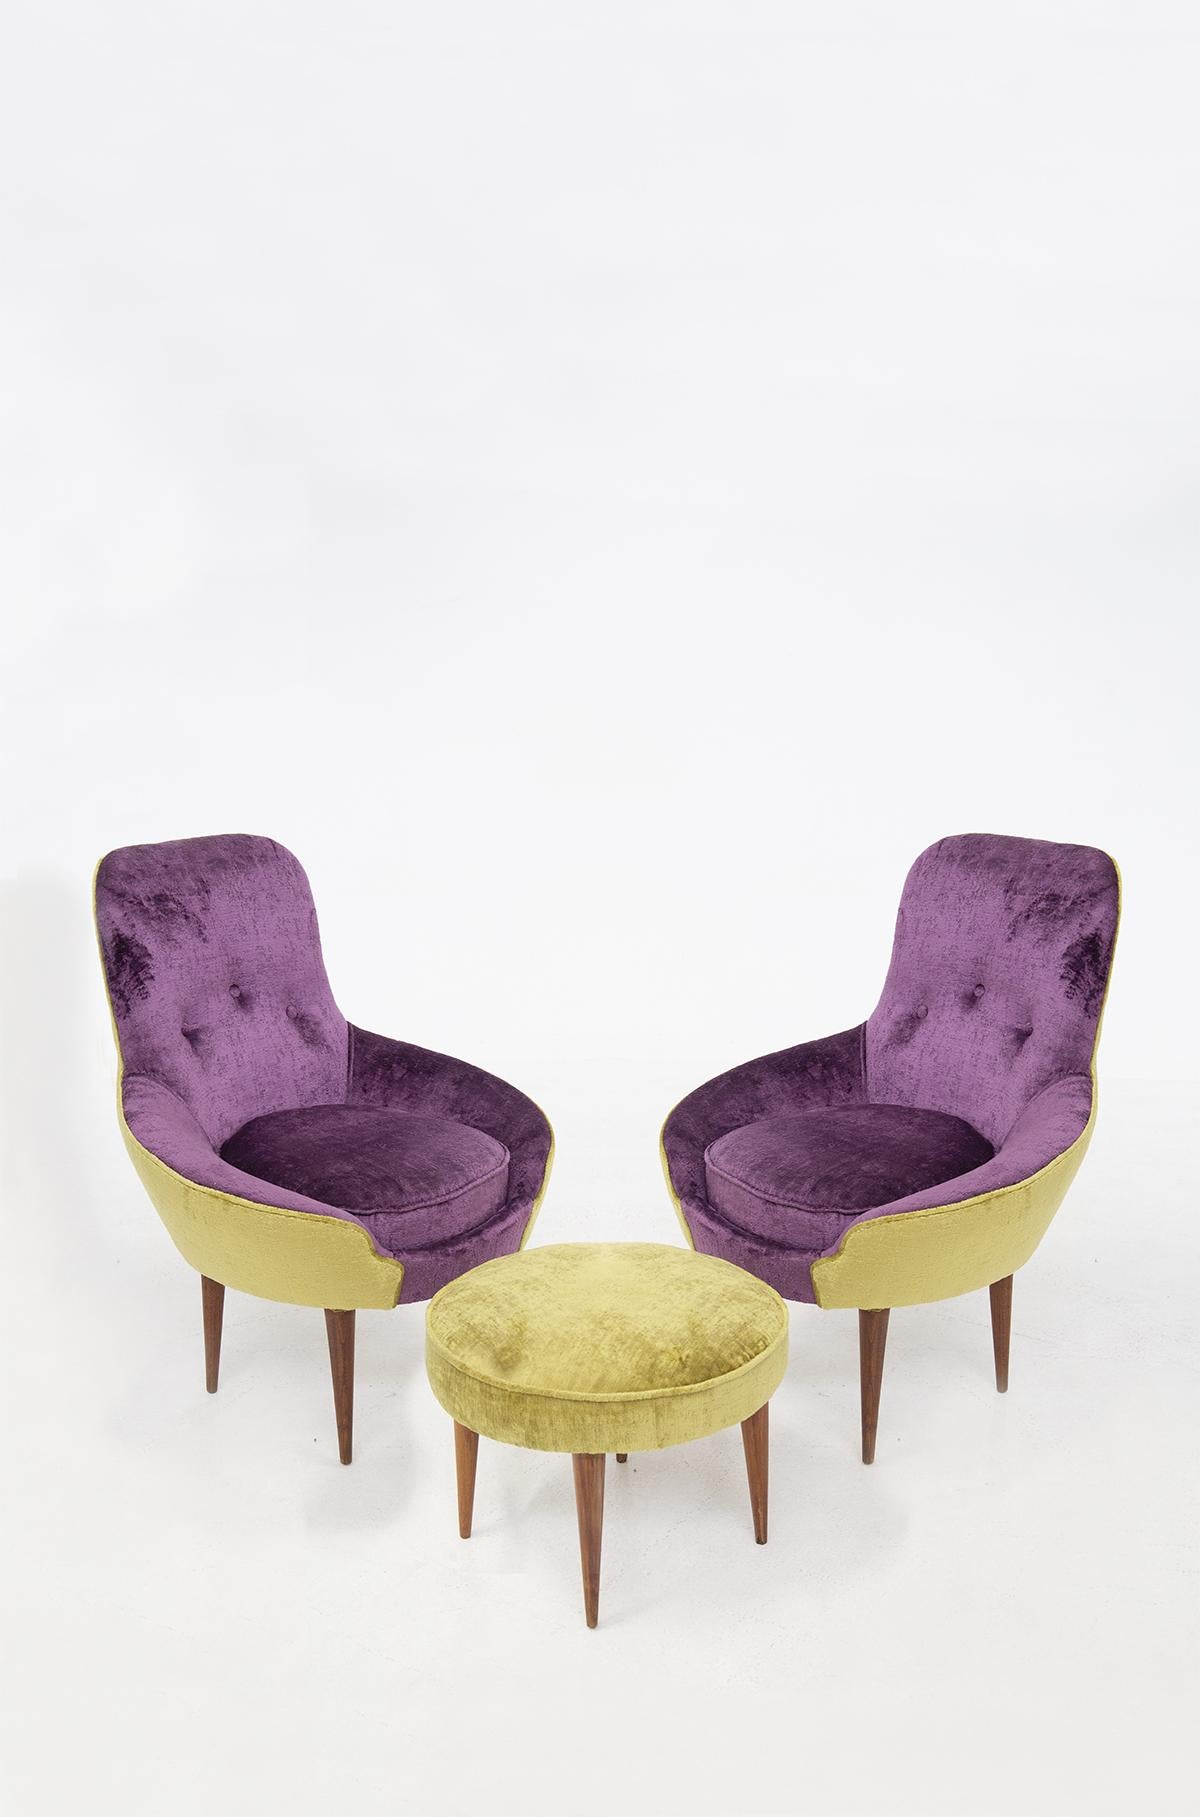 Wonderful set of two small velvet armchairs of fine Italian manufacture from the 50's.
The set is made of fabric reupholstered in purple and acid green velvet, very beautiful and eccentric.Its structure is made entirely of fine and solid wood.